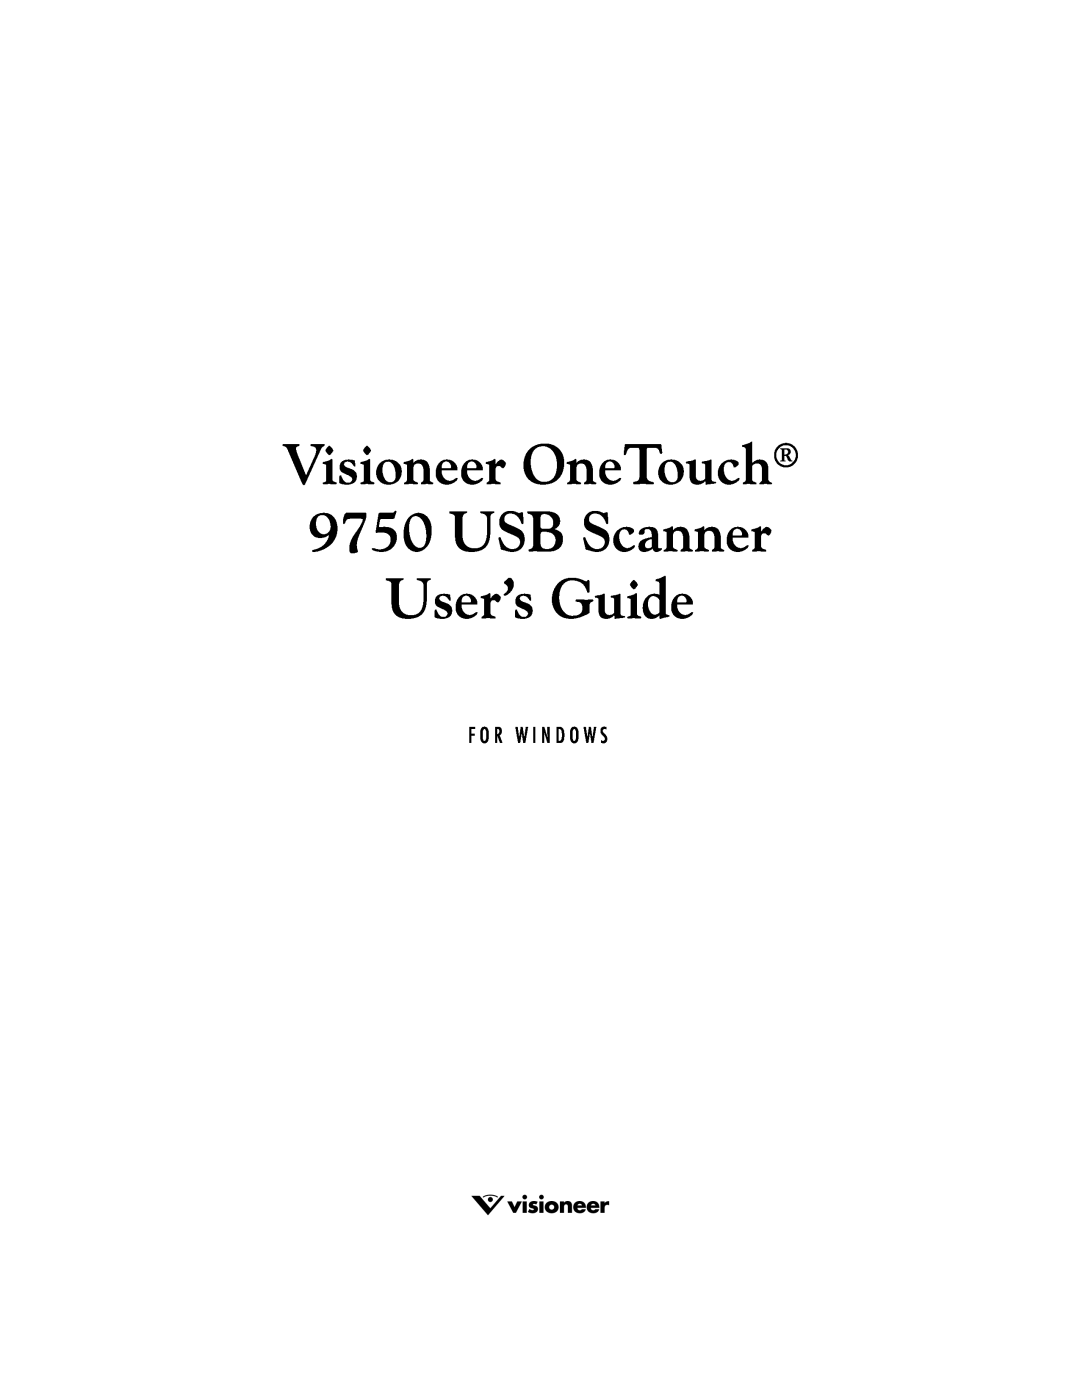 Visioneer manual Visioneer OneTouch 9750 USB Scanner User’s Guide, F O R W I N D O W S 